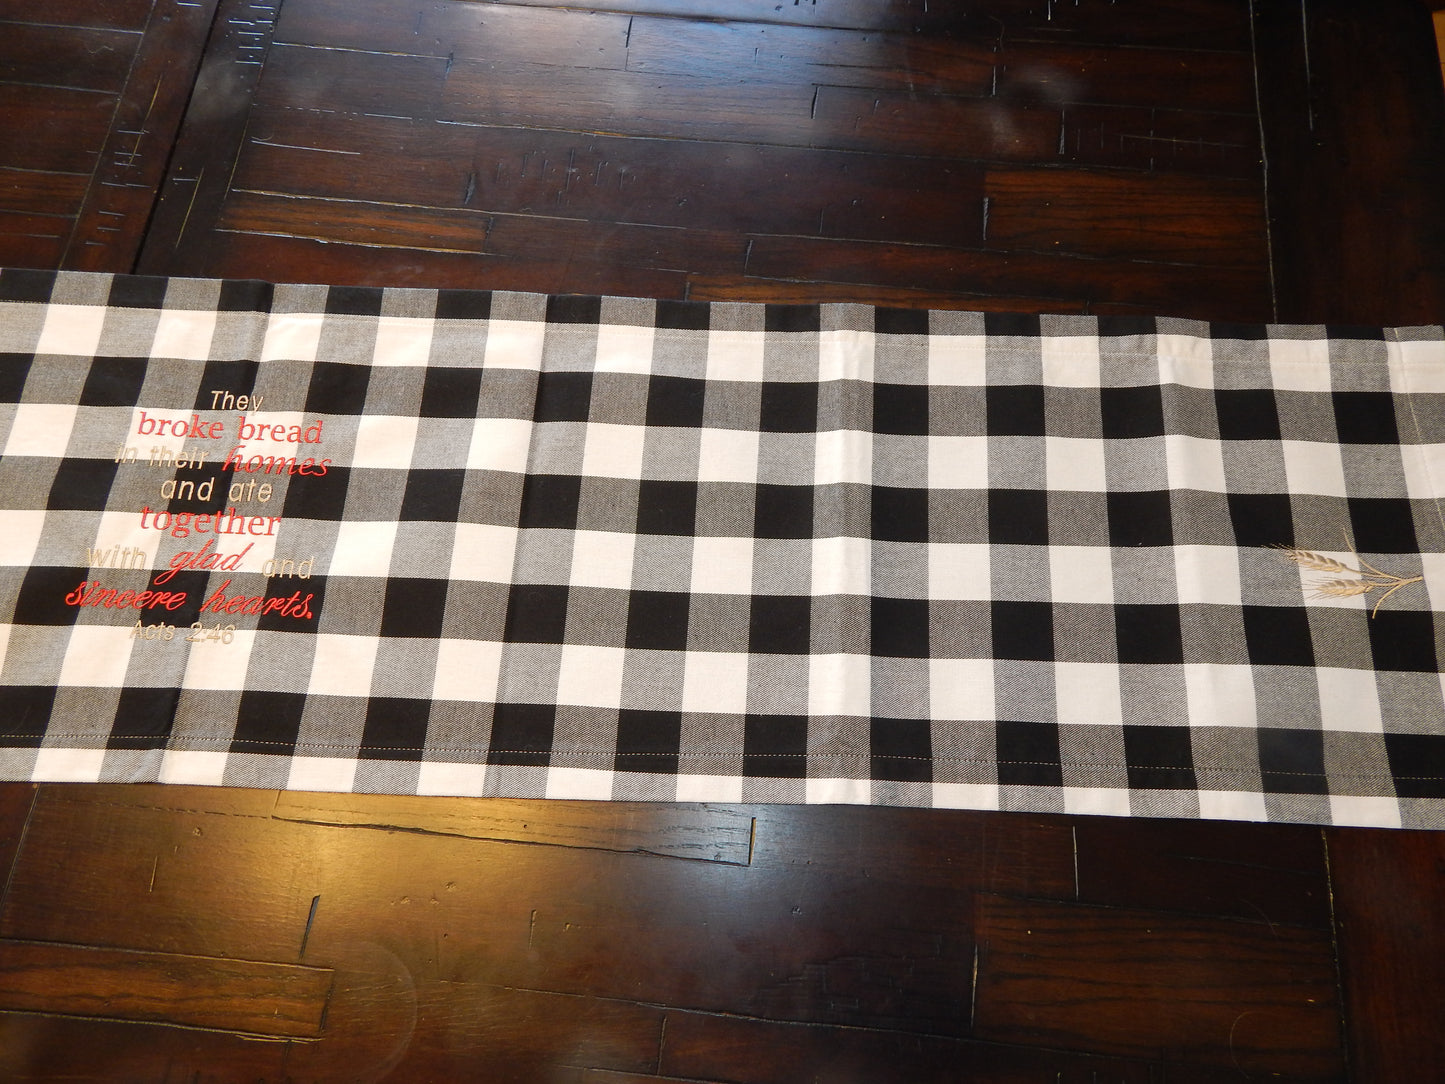 Acts 2 46 | Bible Saying Table Runner | Buffalo Plaid | Christian Table | Table Decoration | Plaid Table Runner | House Warming | Embroidery